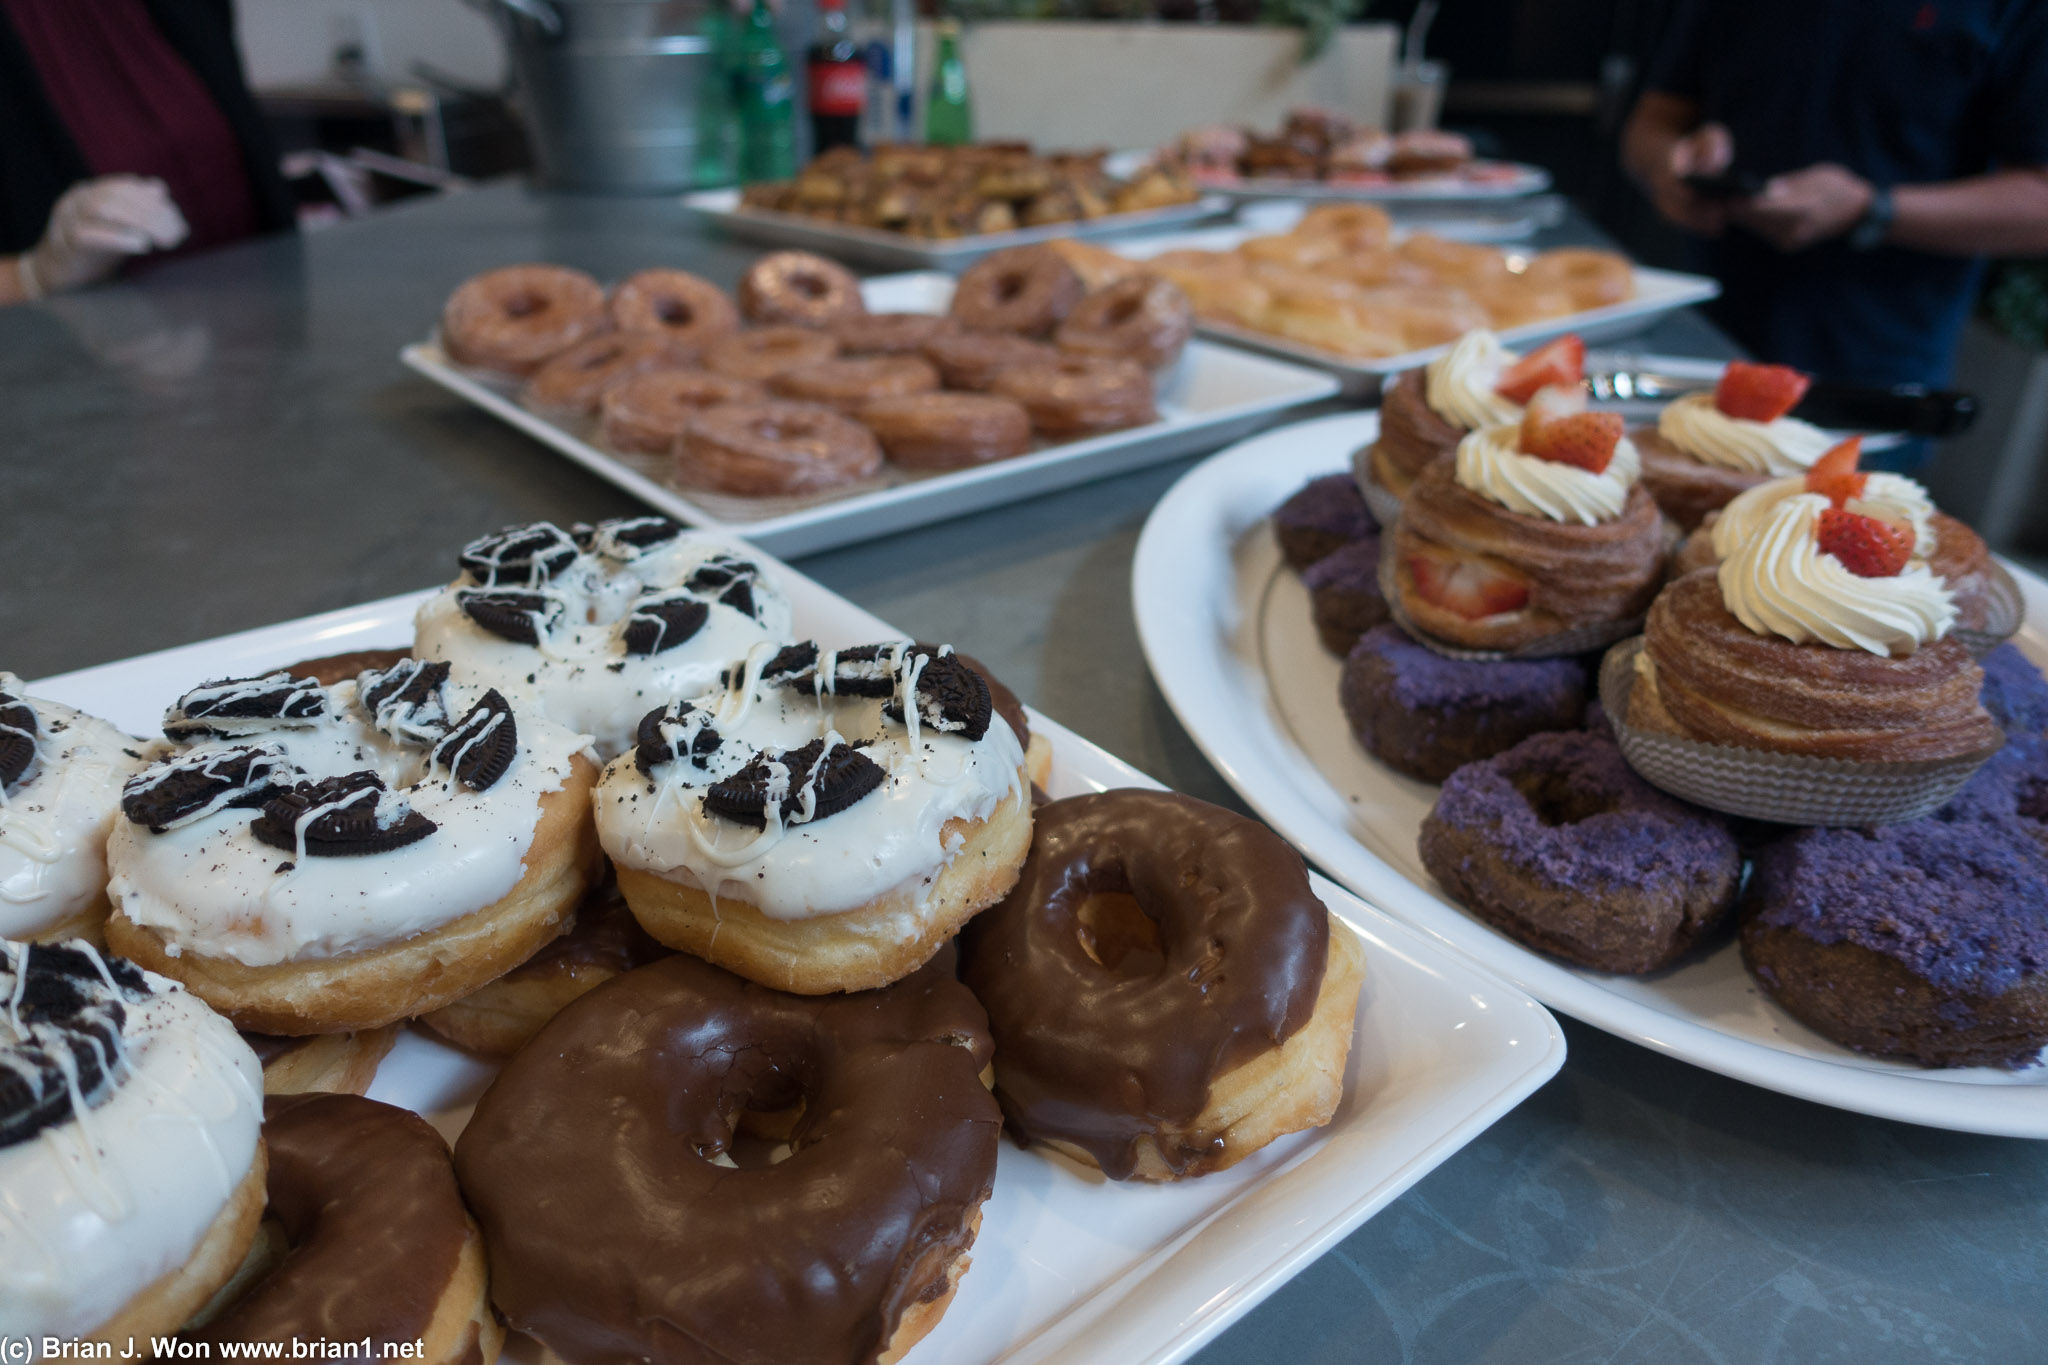 They catered DK's Donuts.